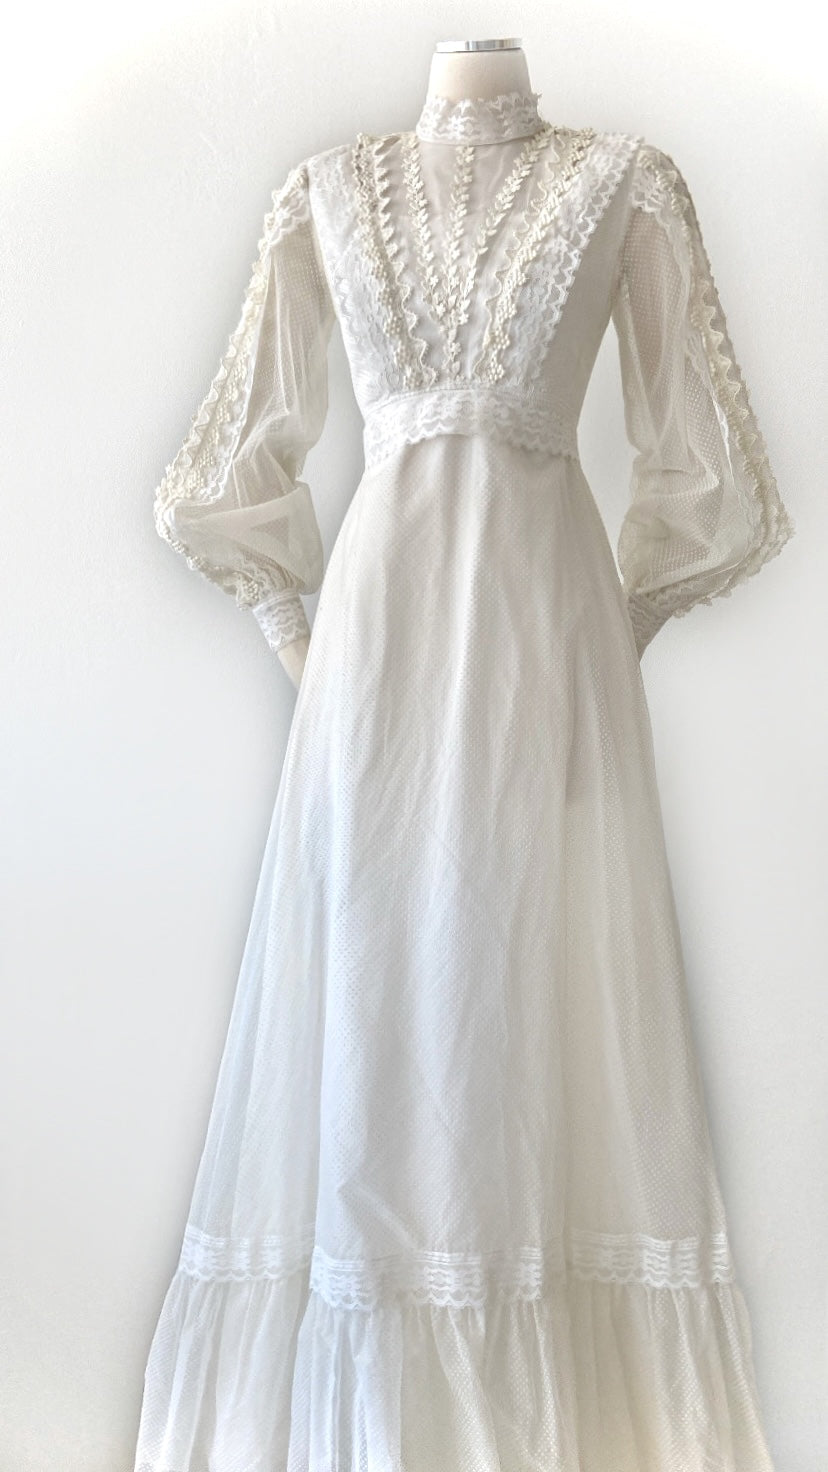 Swiss Dot Lace Embellished Gown